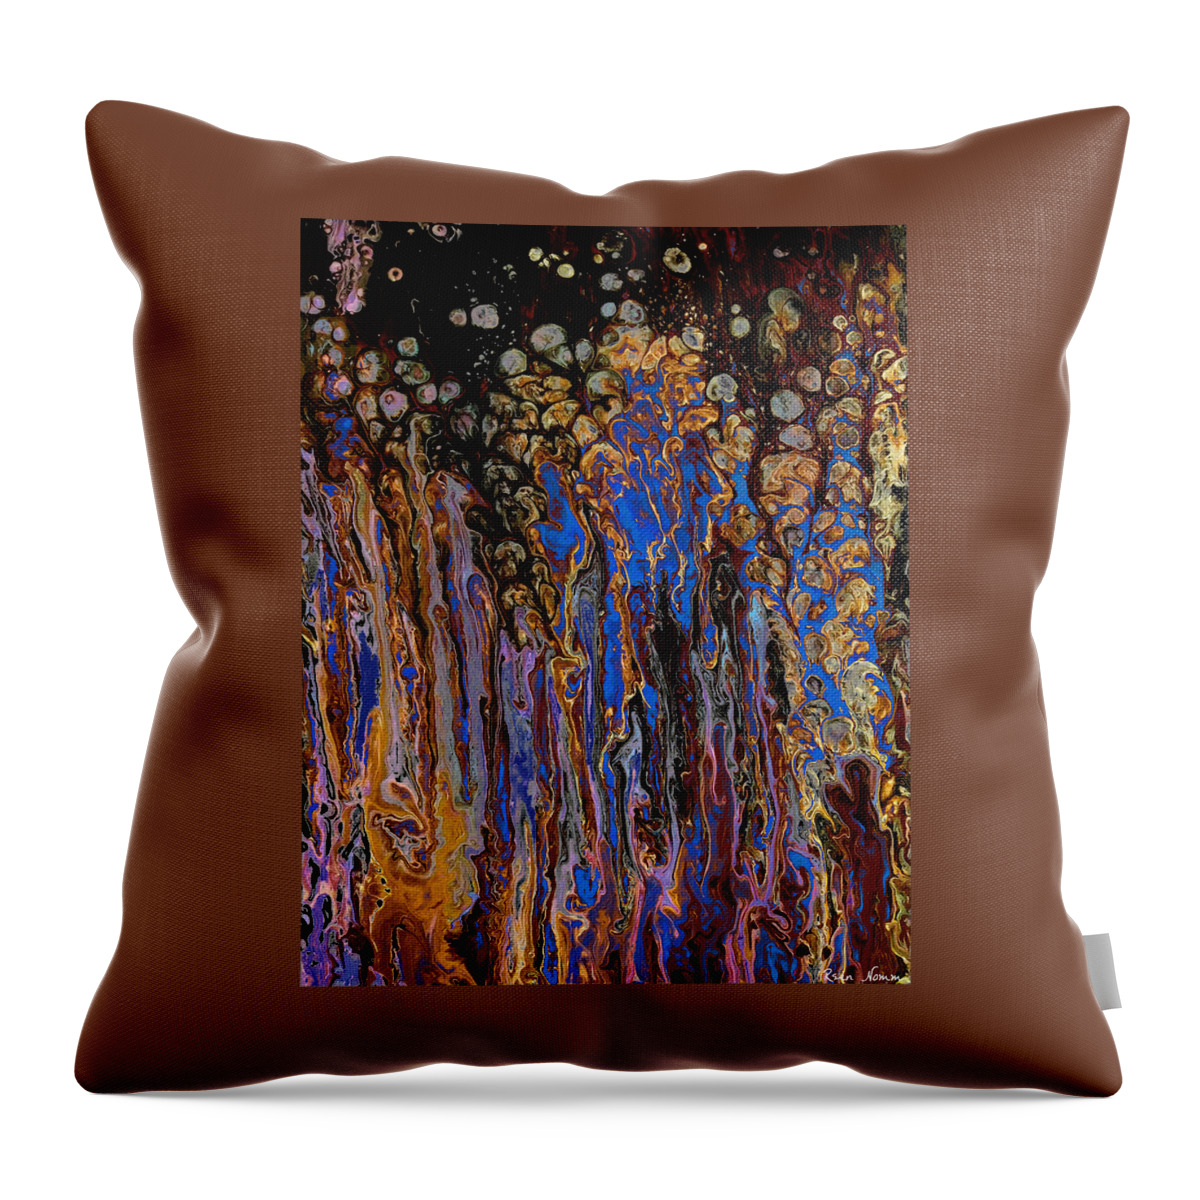  Throw Pillow featuring the painting Trouble Brewing by Rein Nomm